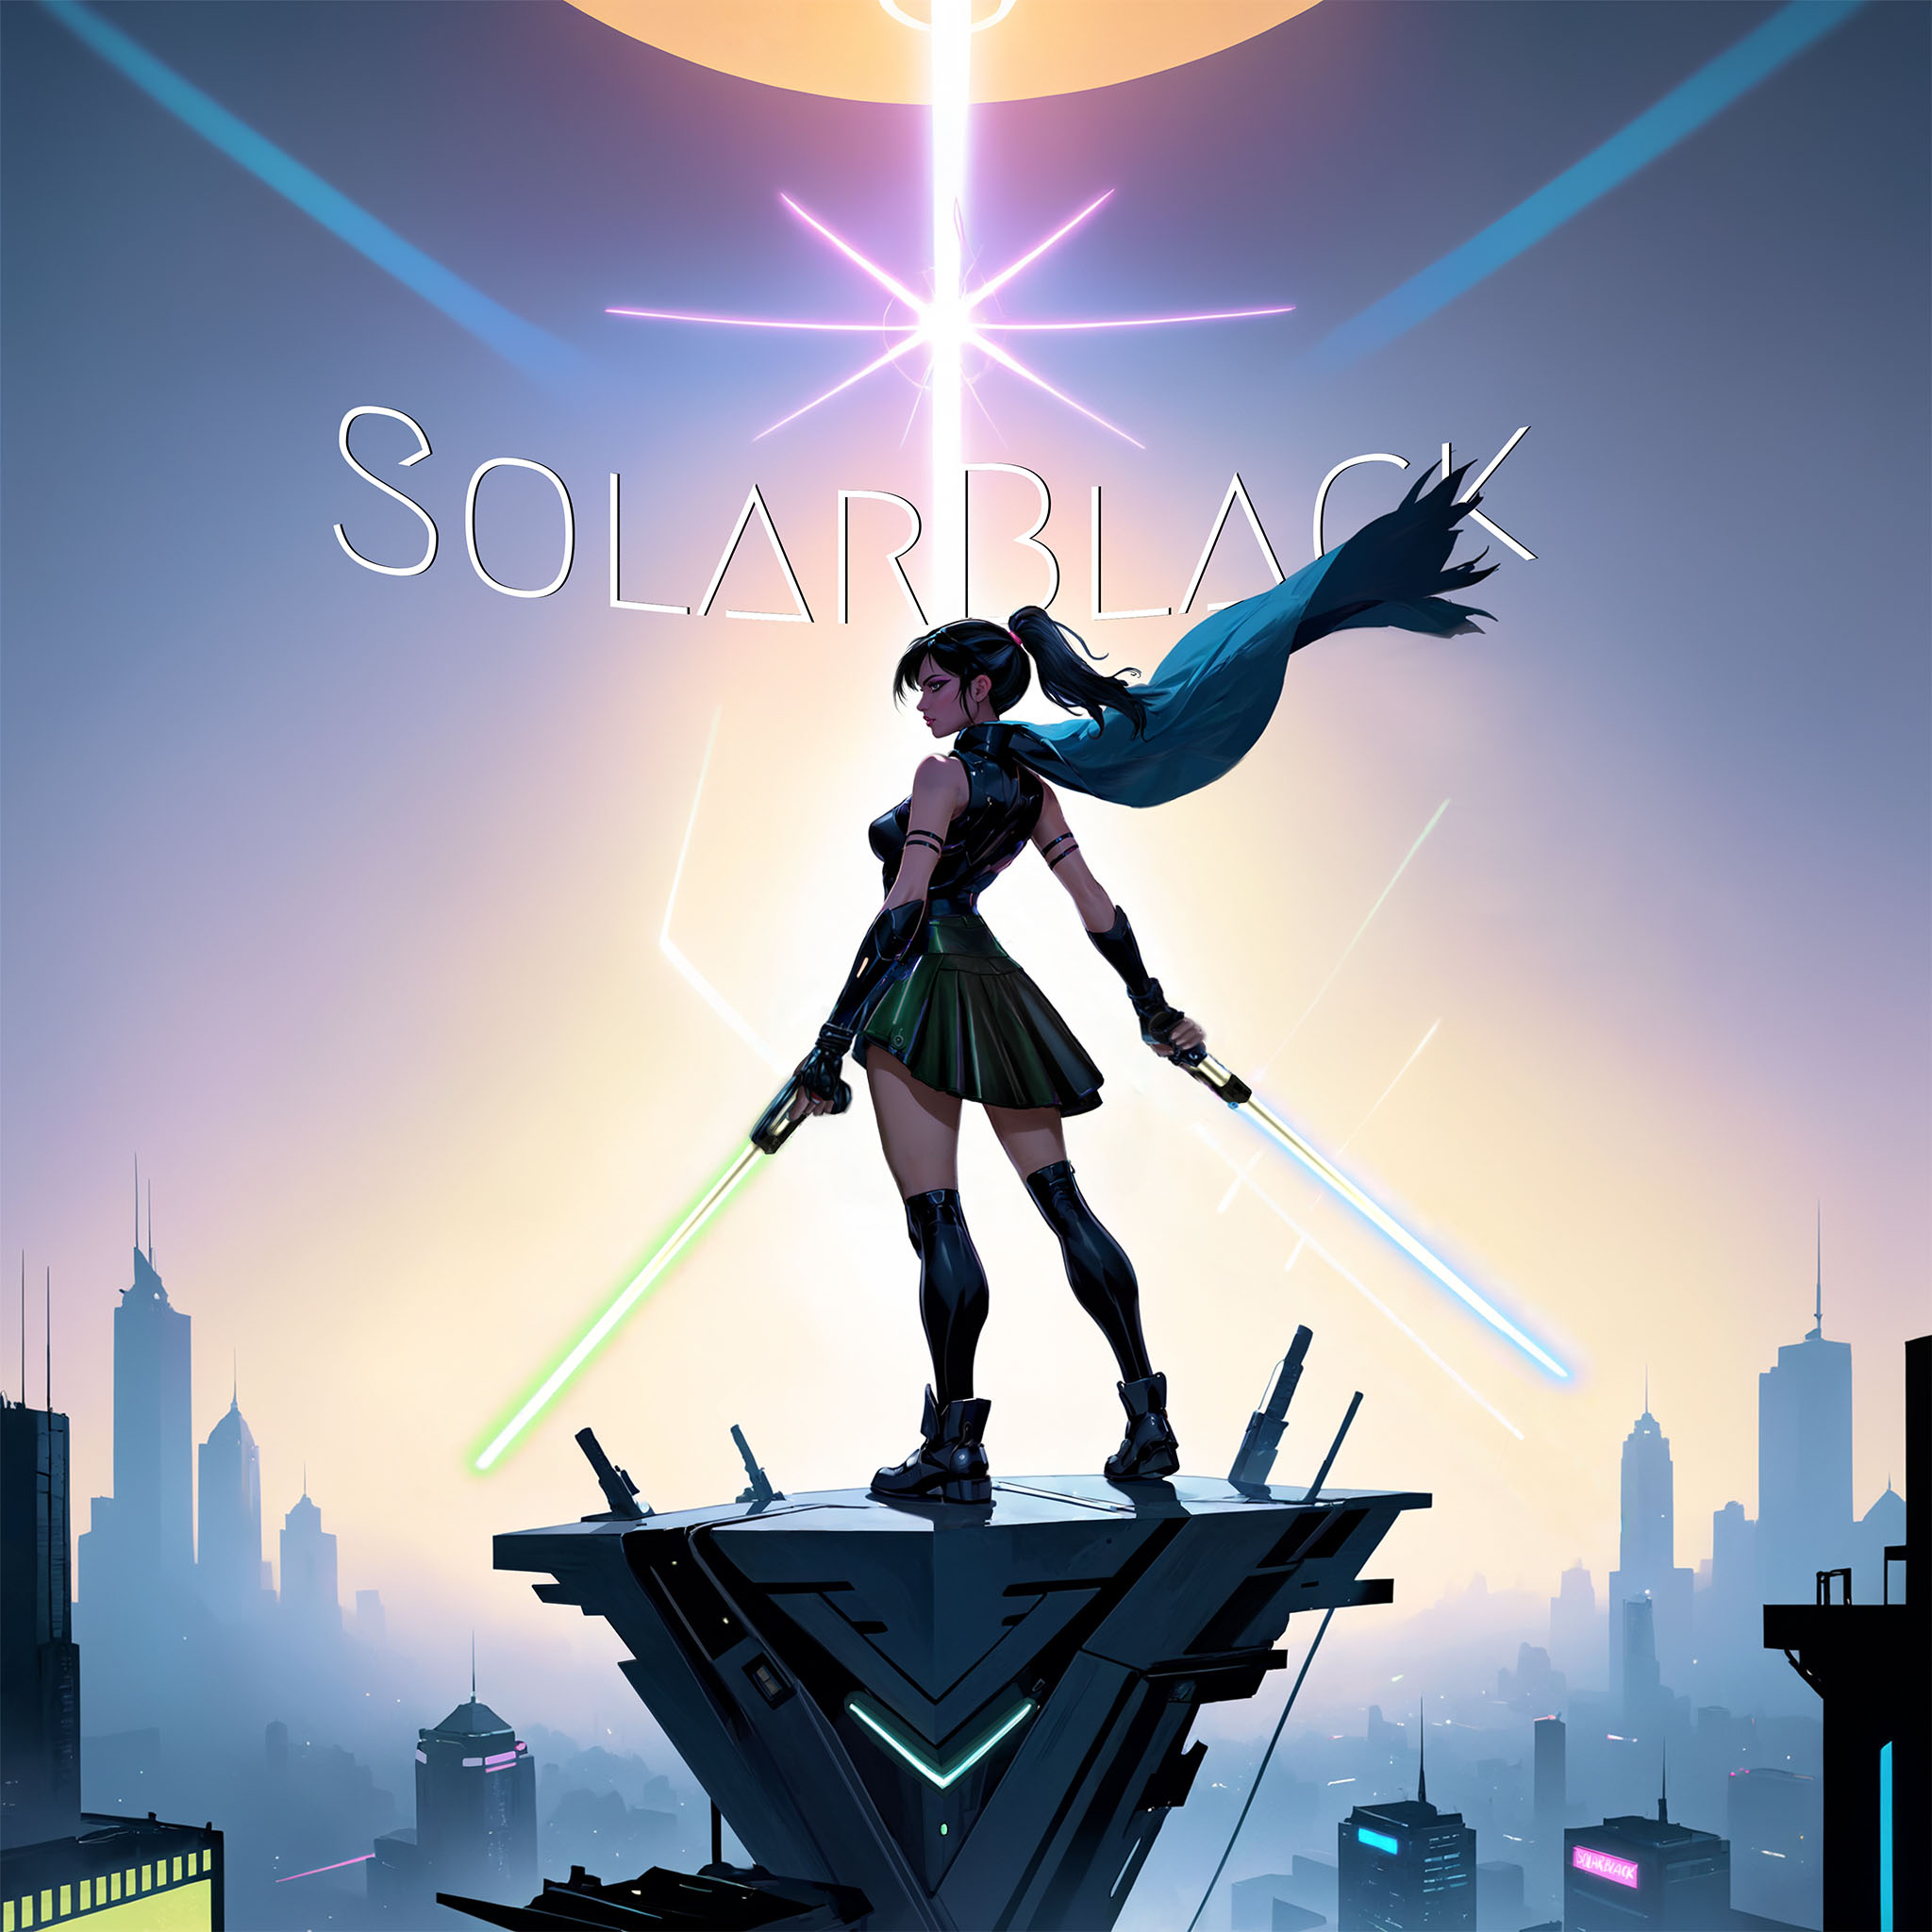 here you can see the hero art of SolarBlack. A man standing on a plaform slicing and shooting incoming targets